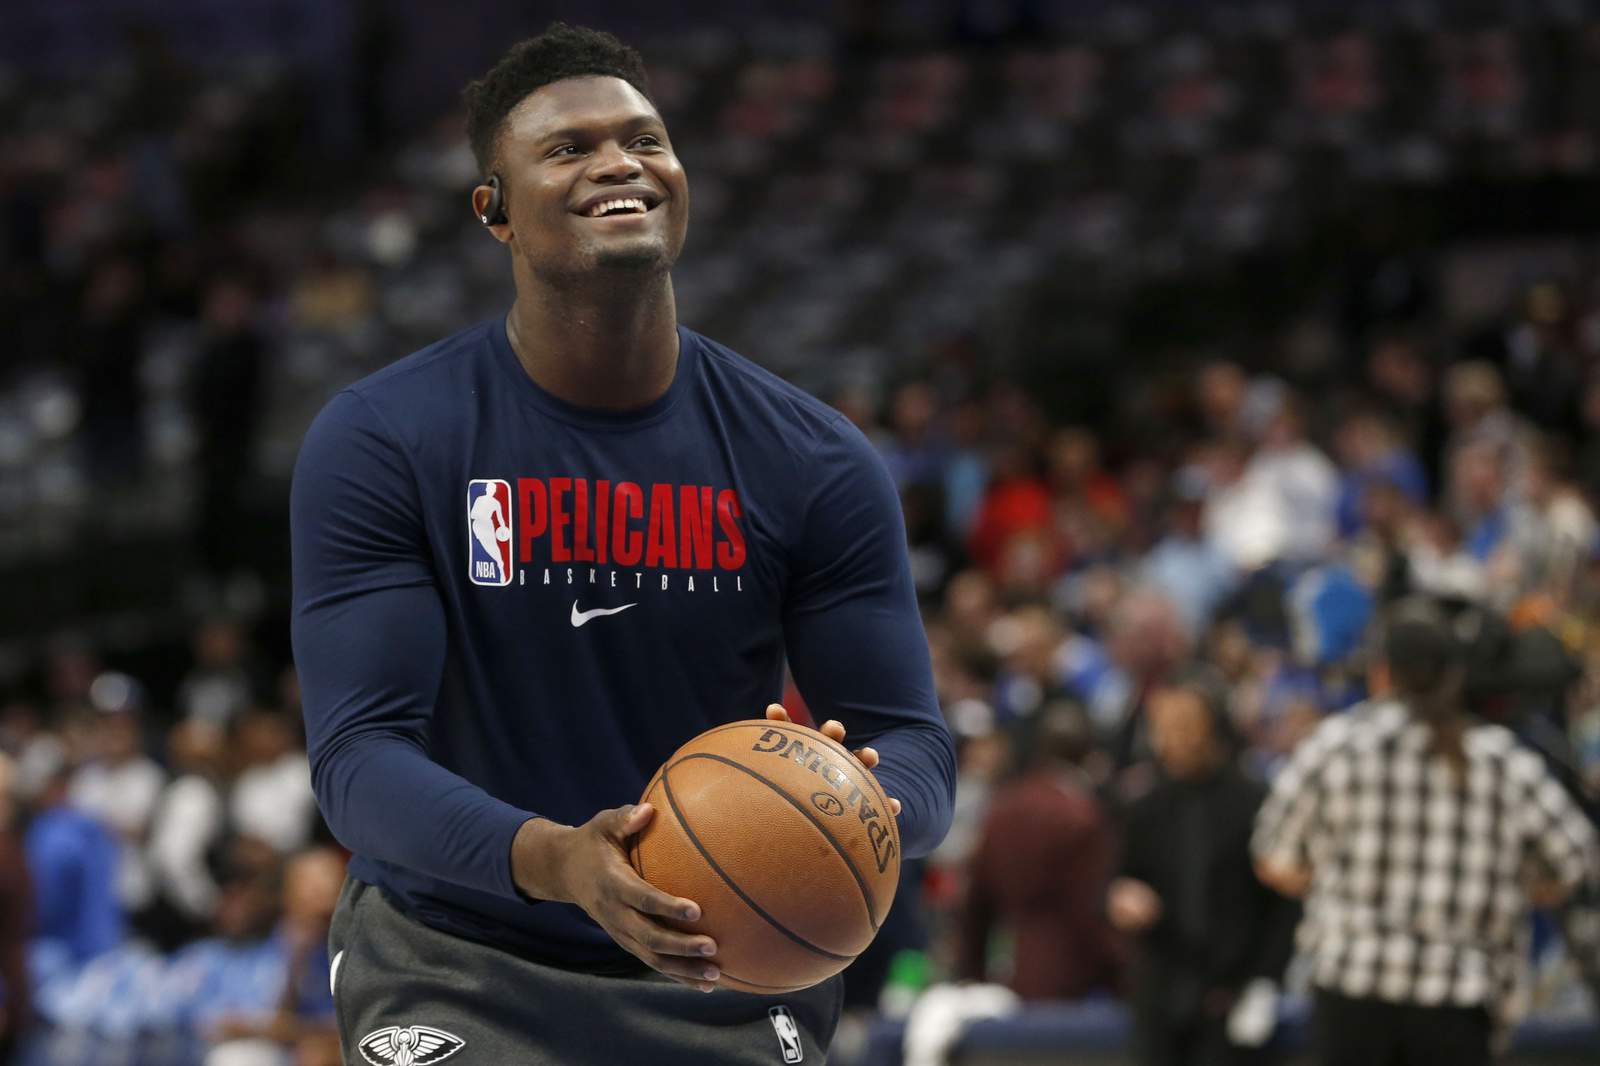 Zion Williamson getting tested, but return to bubble unknown